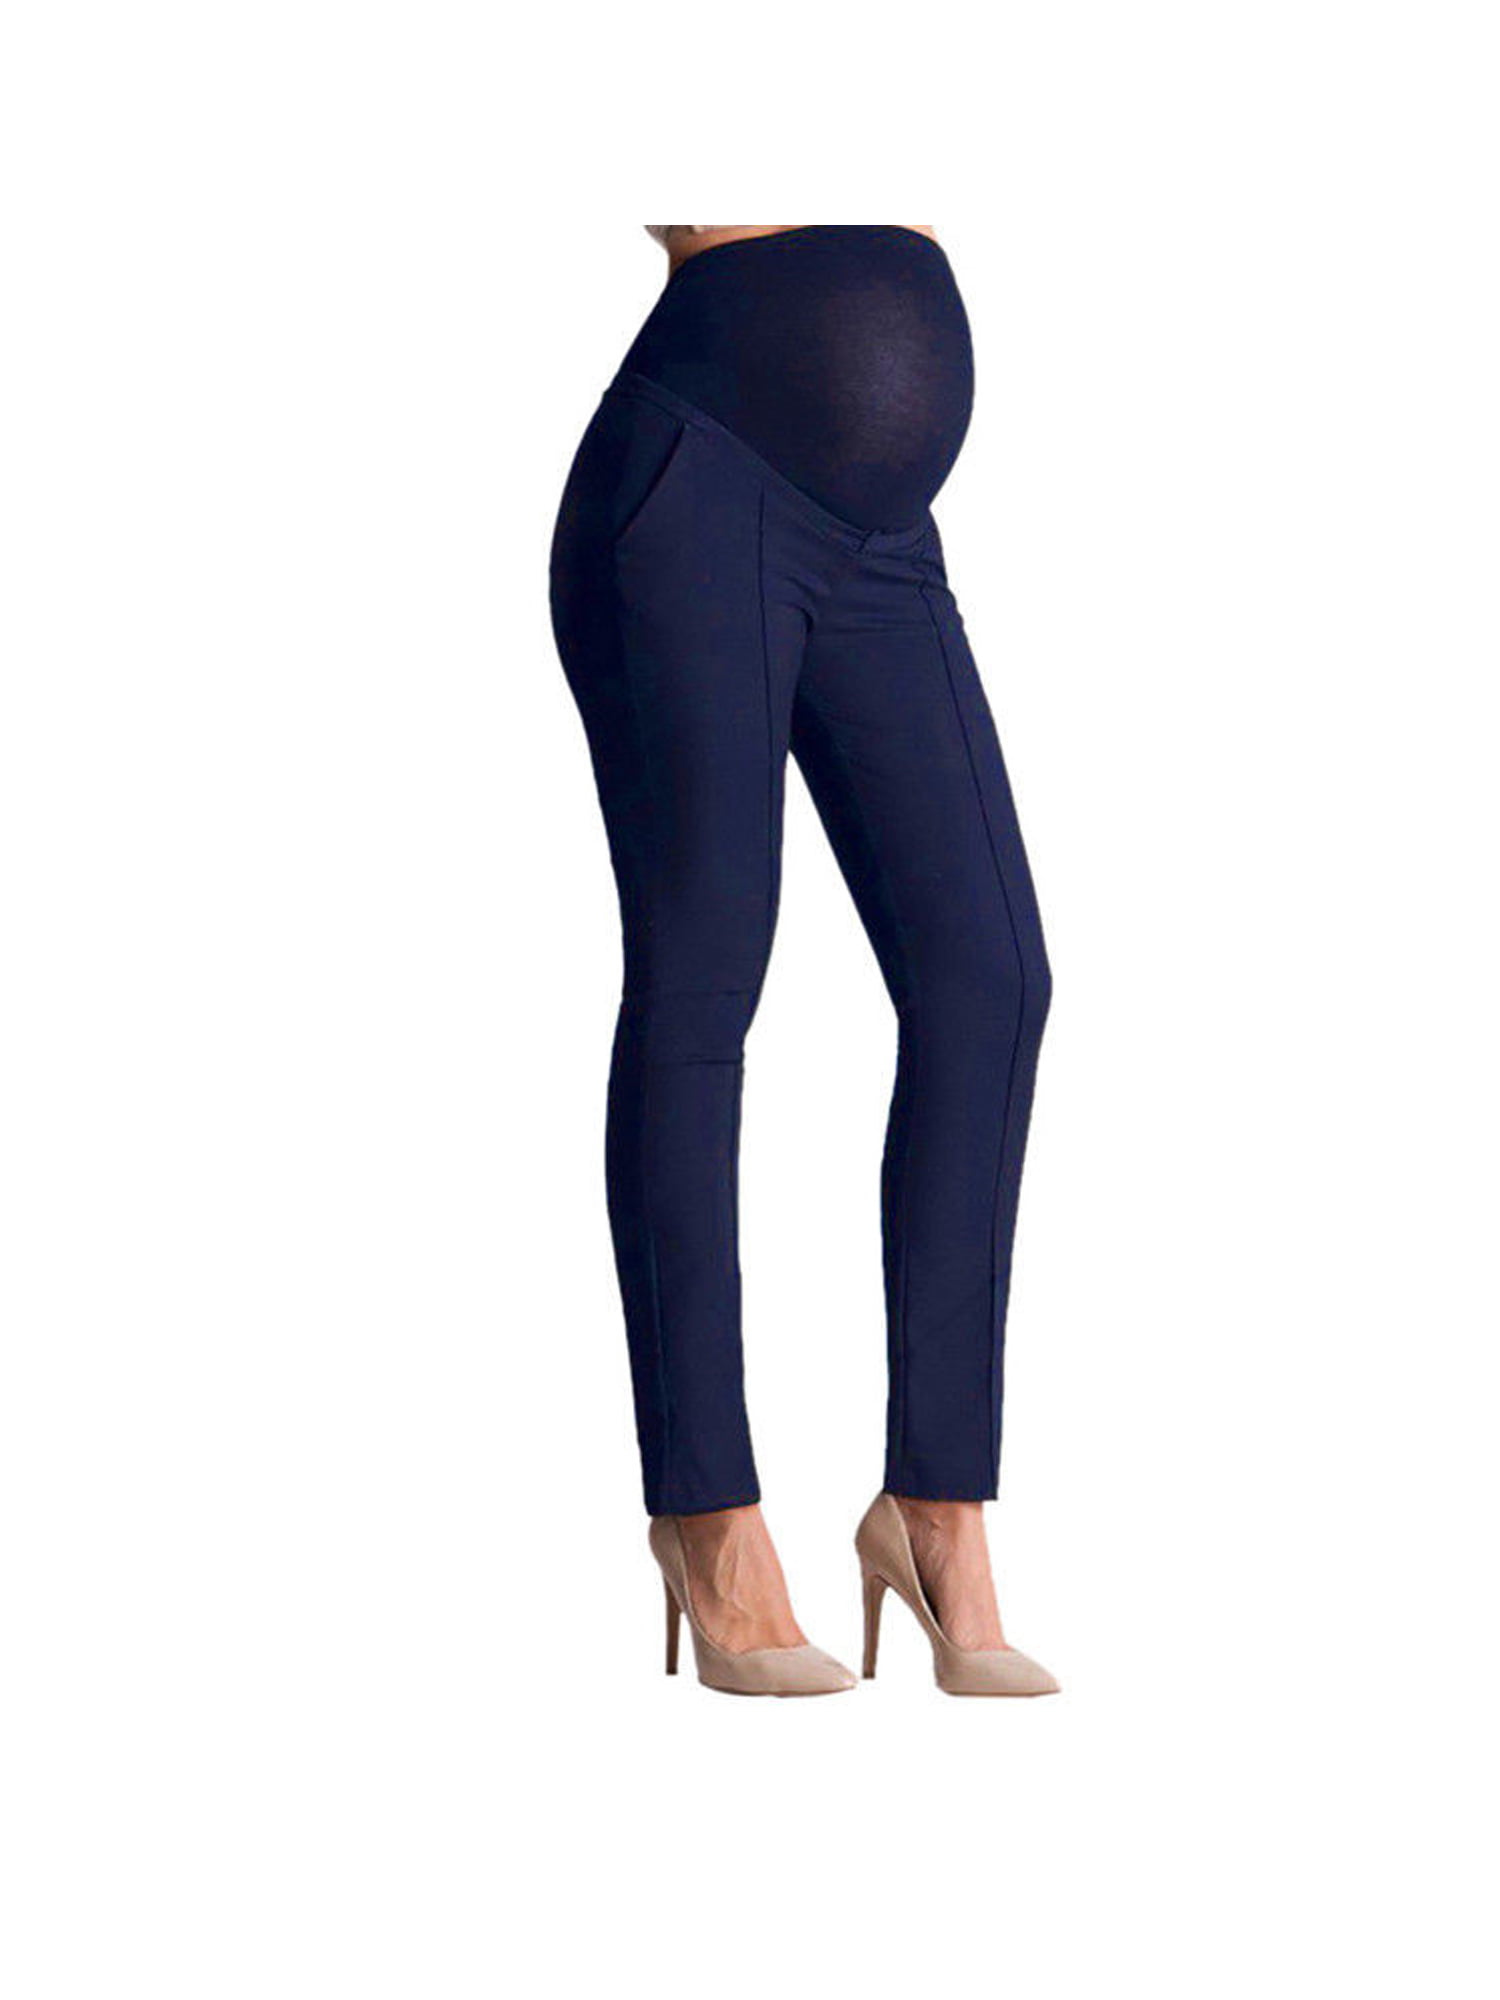 The Best Maternity Pants for the Office - CorporetteMoms | Maternity work, Maternity  work wear, Maternity business attire